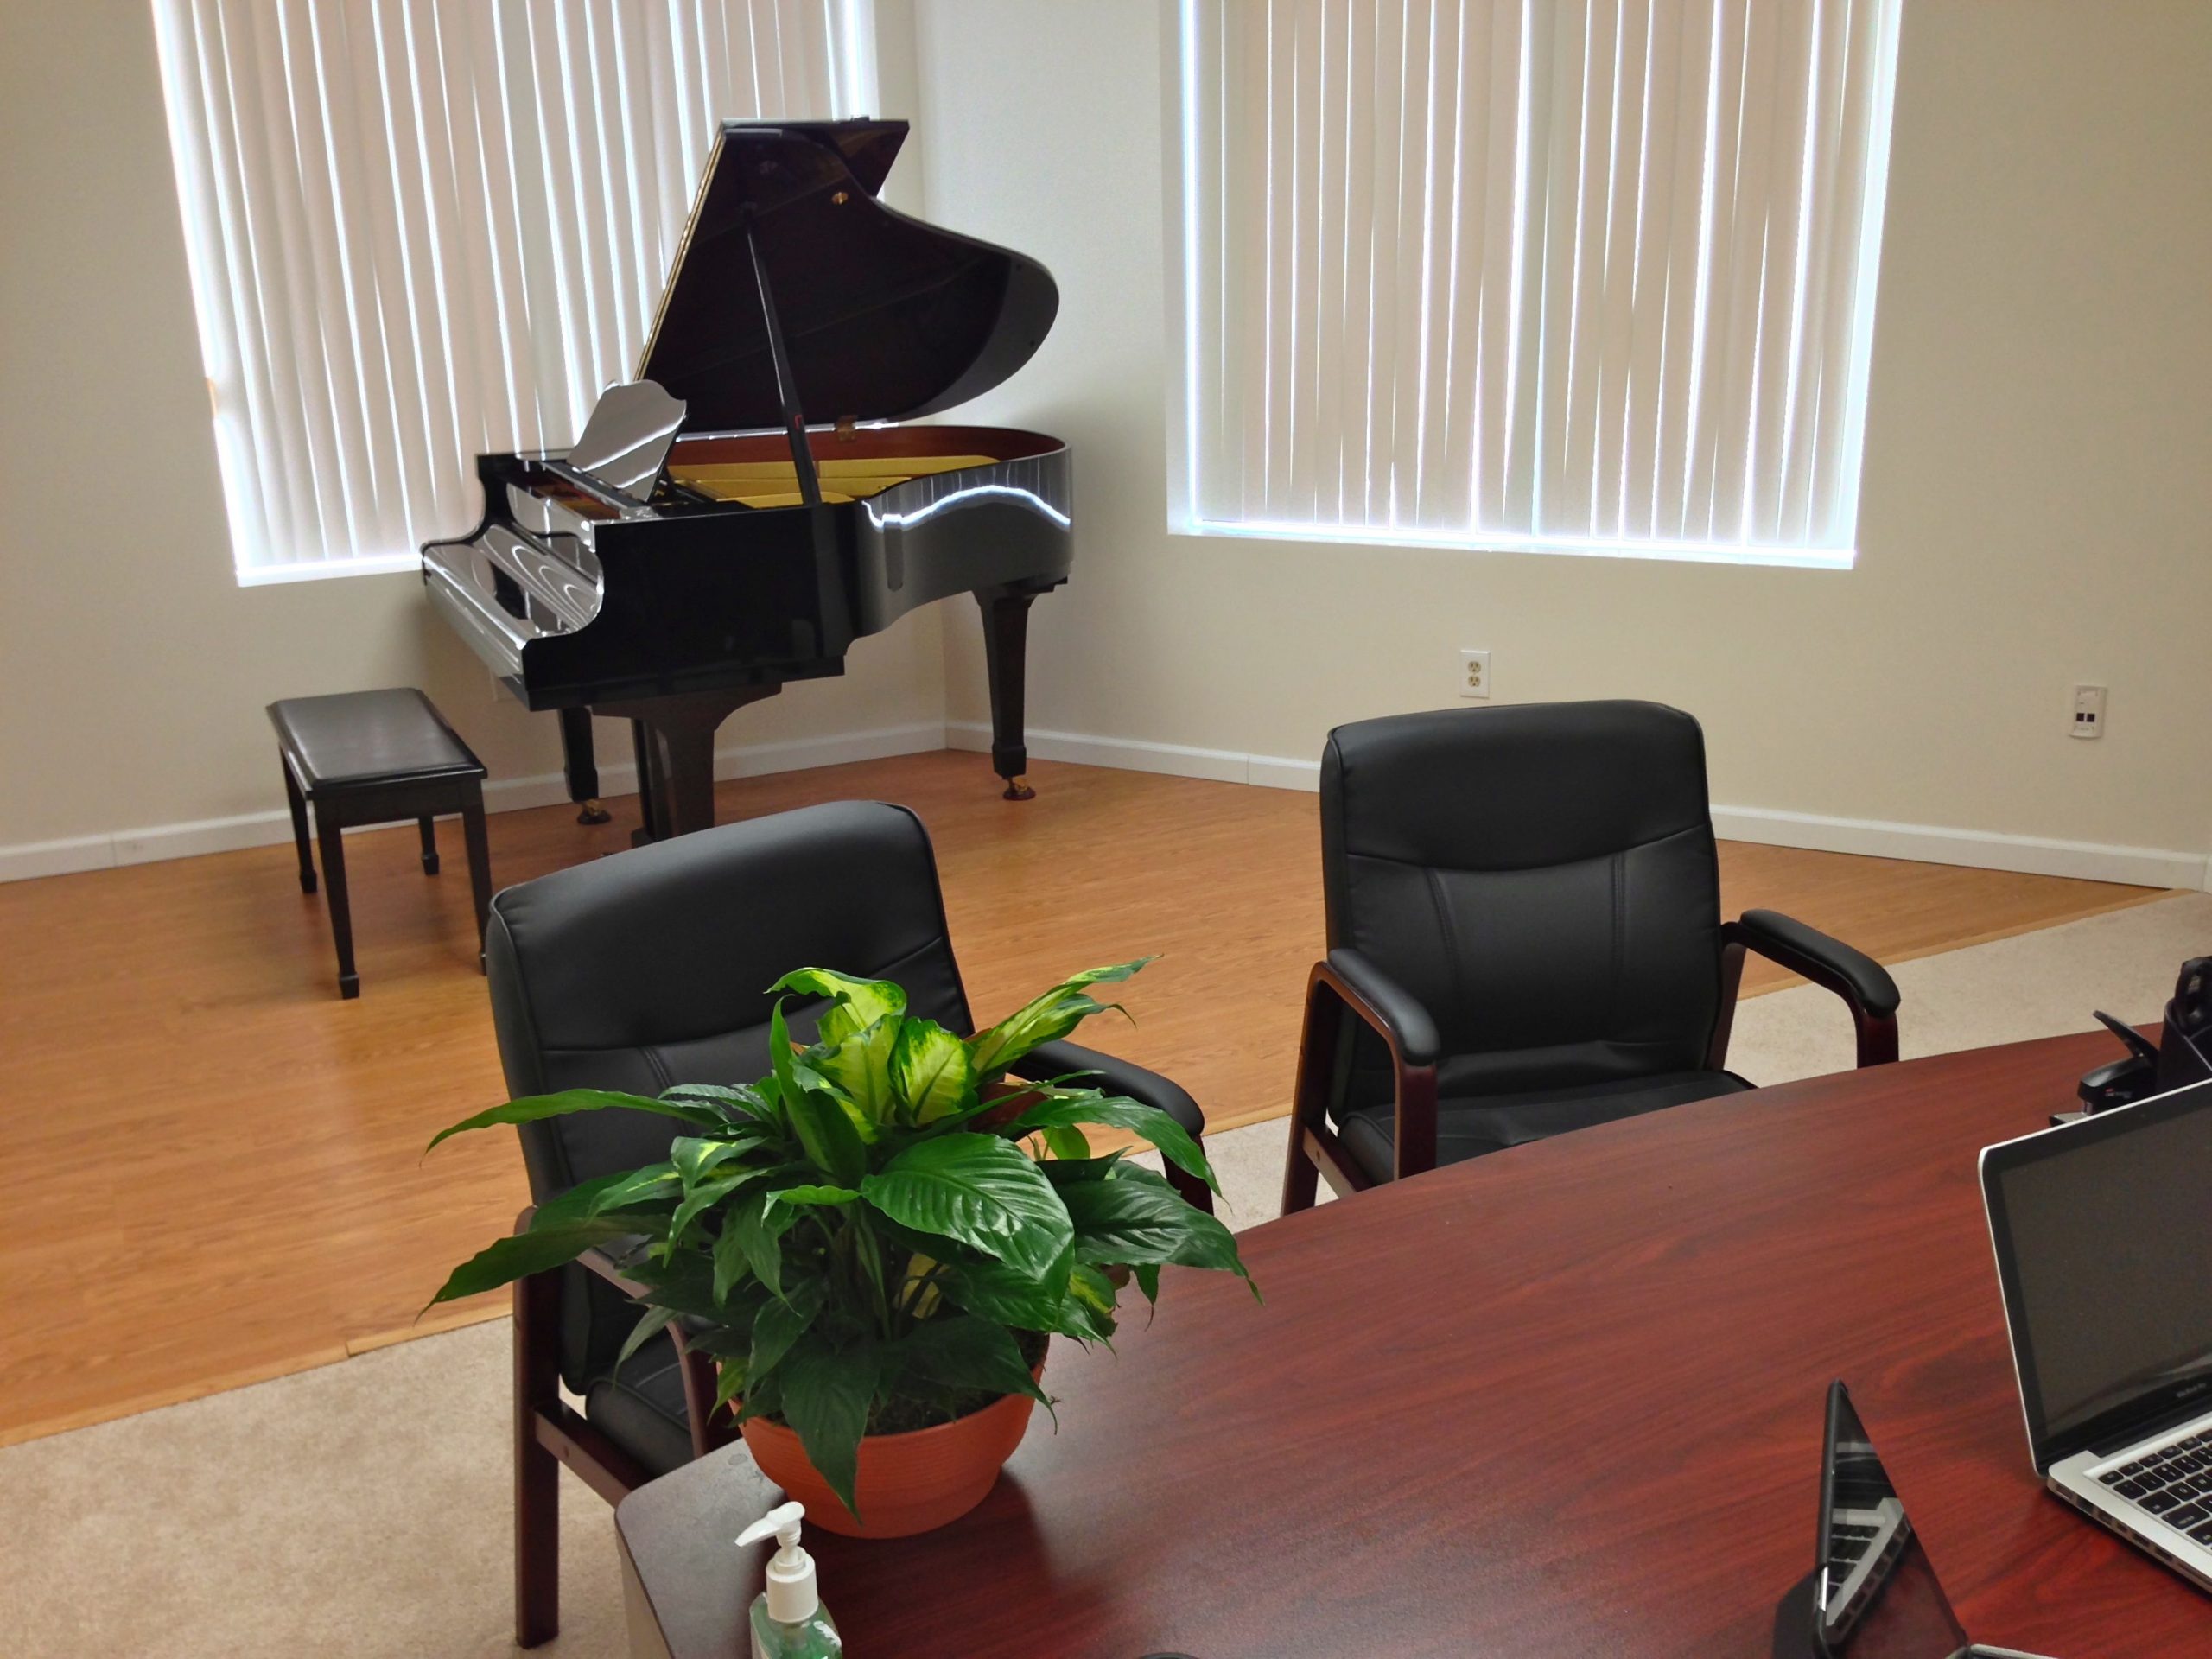 Practice & Rehearsal Studios with Grand Pianos for Hourly Rental